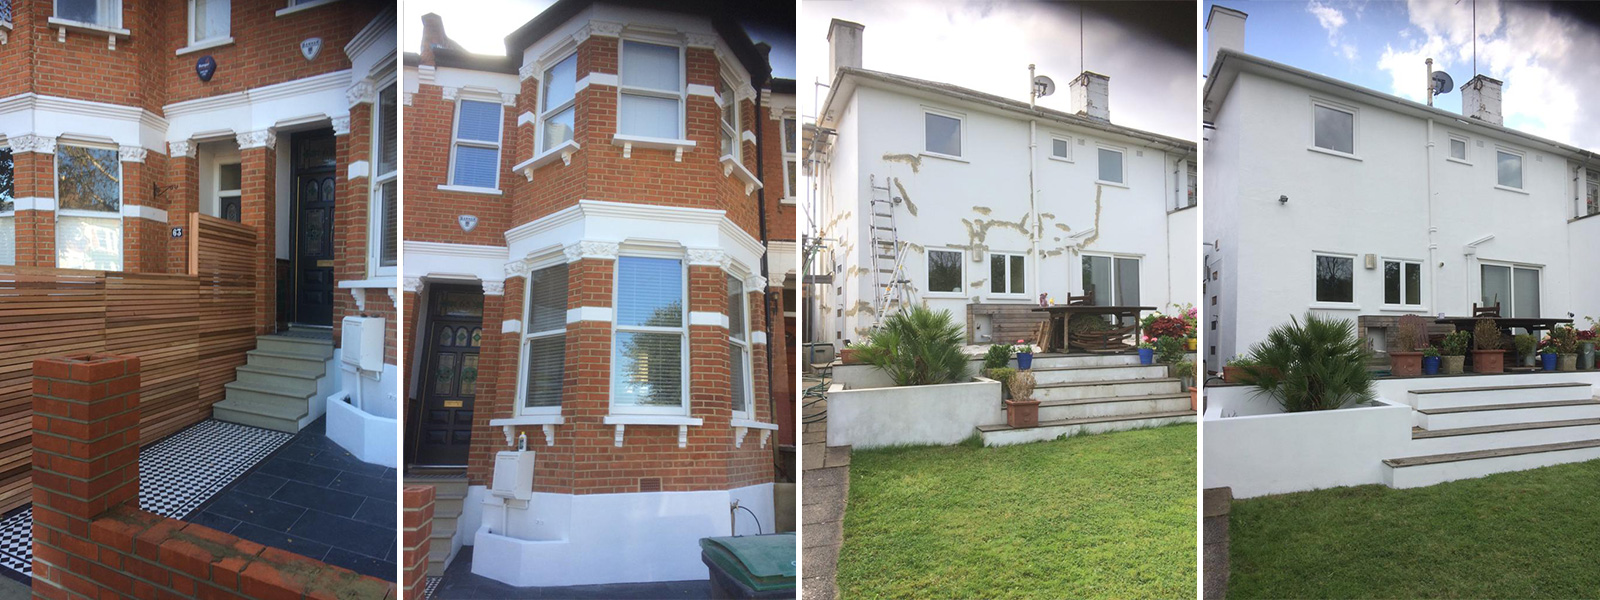 Exterior Decorating & Painting Services In North London - Colour Chart Decorating